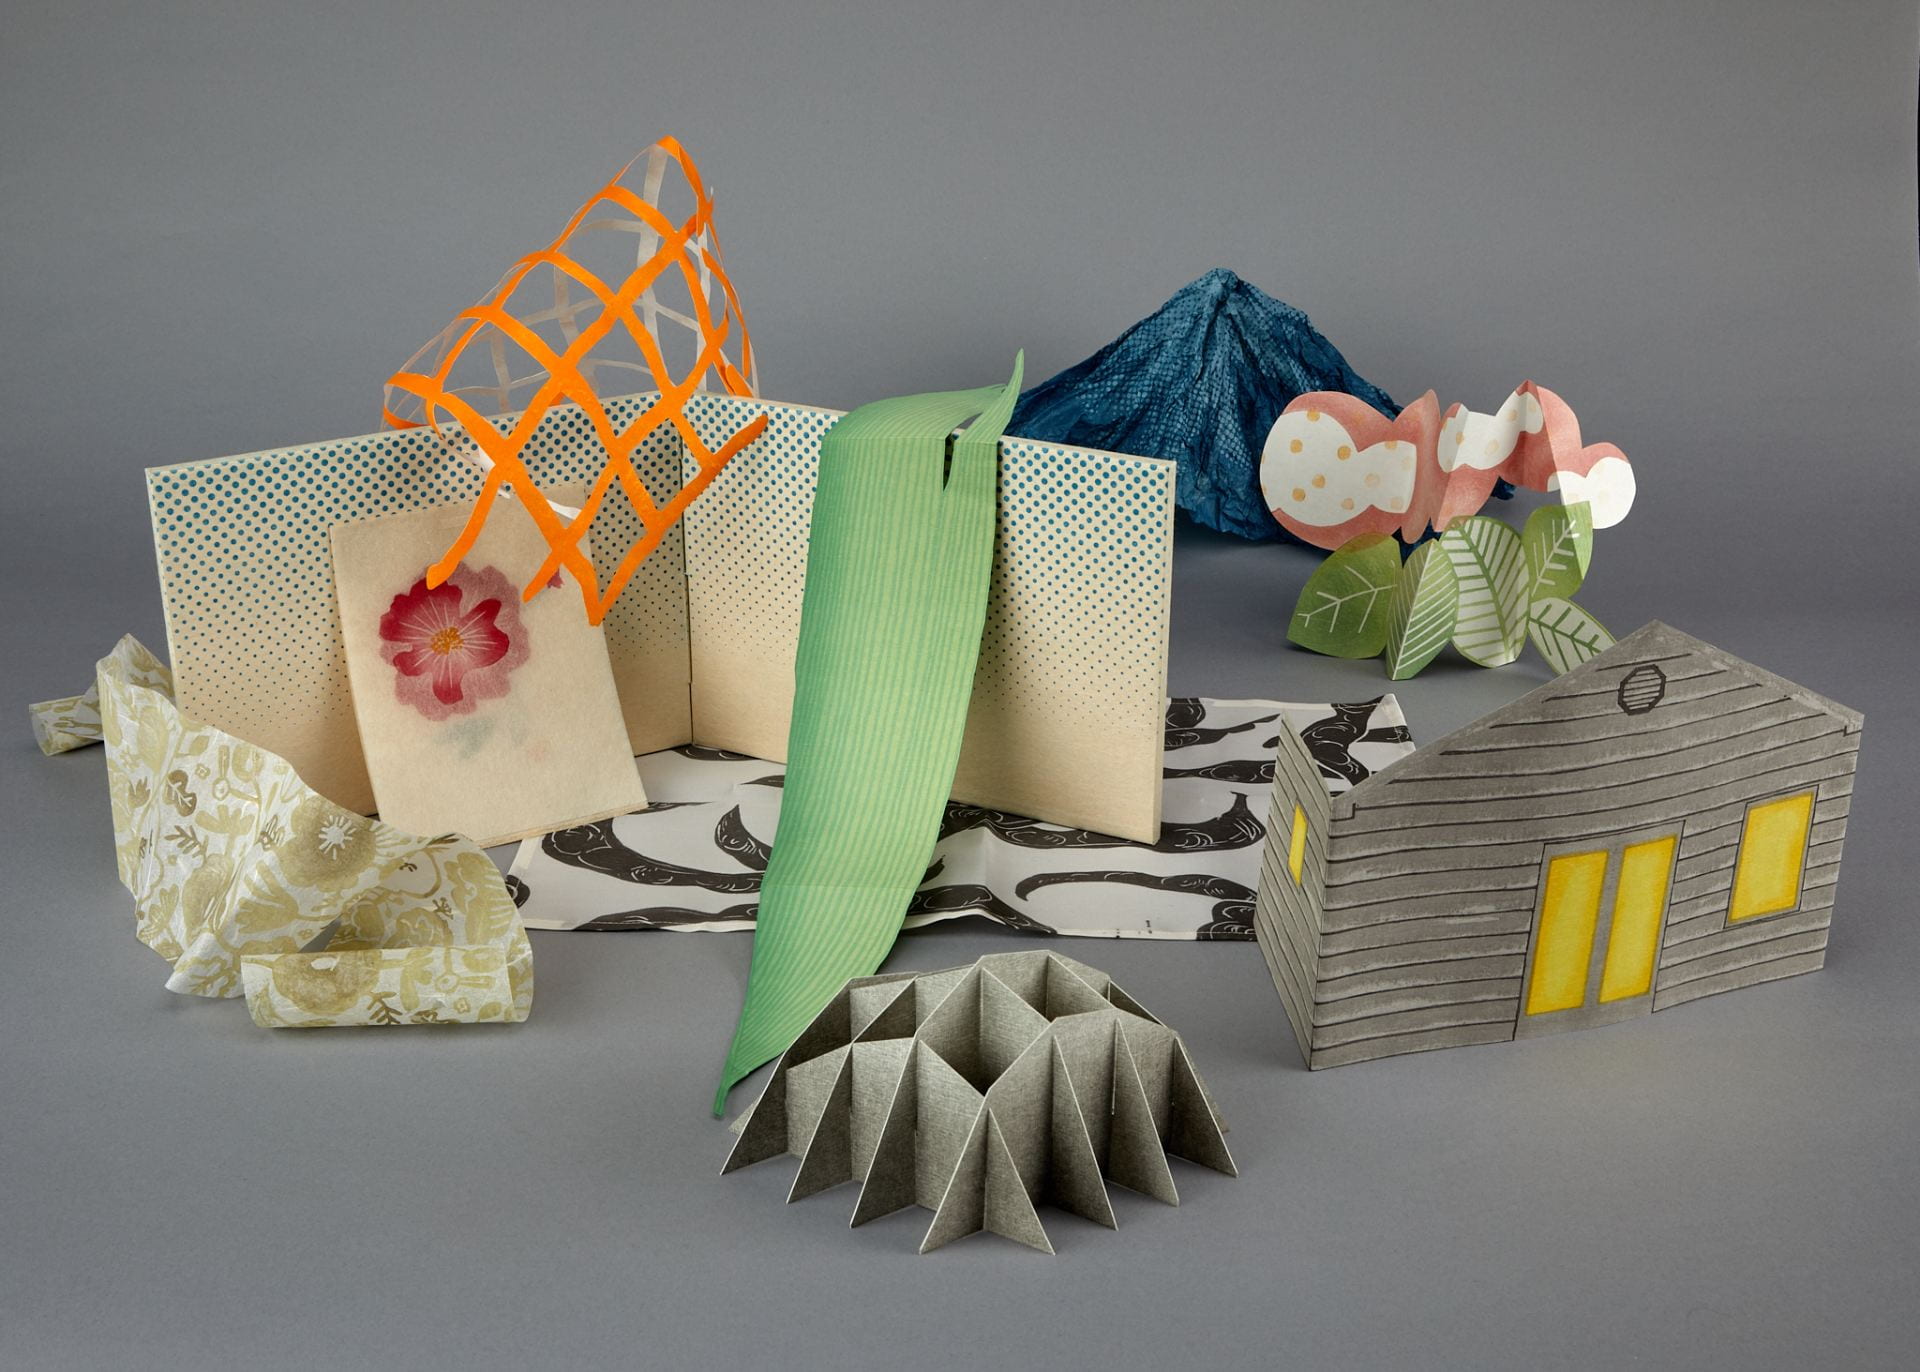 wood+paper+box, "Mise-en-Scène" (2023 Beach Museum of Art Gift Print). Featuring prints cut in various shapes and assembled in a composition. Works are by artists Katie Baldwin, Mariko Jesse, and Yoonmi Nam put together in a box.